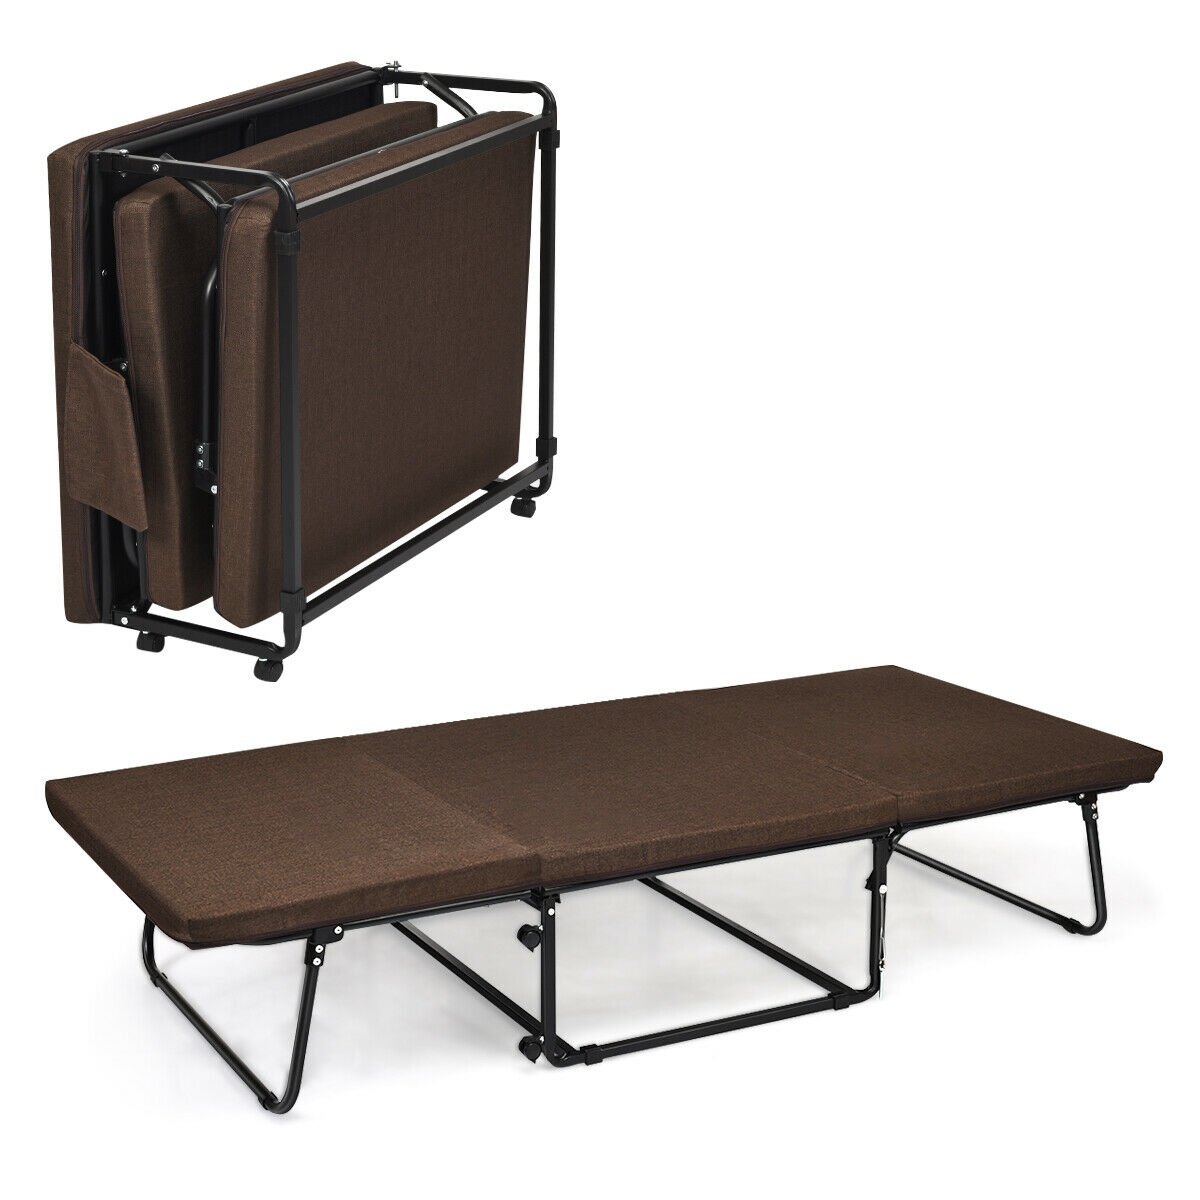 Folding Guest Sleeper Bed w/6 Position Adjustment, Brown